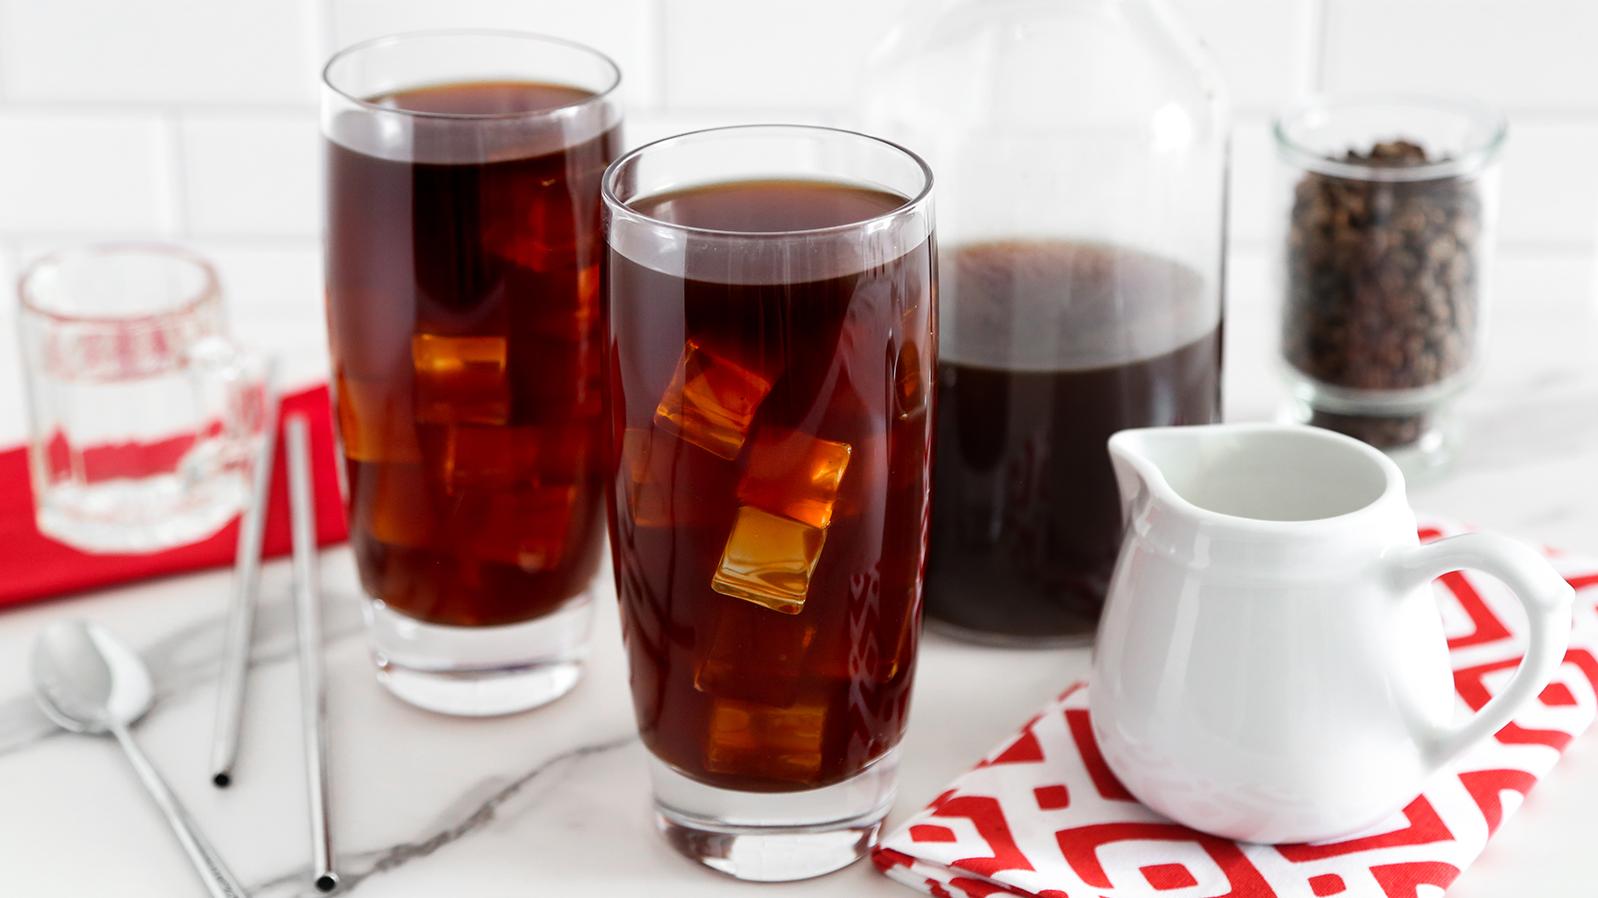  Fill your glass with refreshing and smooth cold brew coffee.